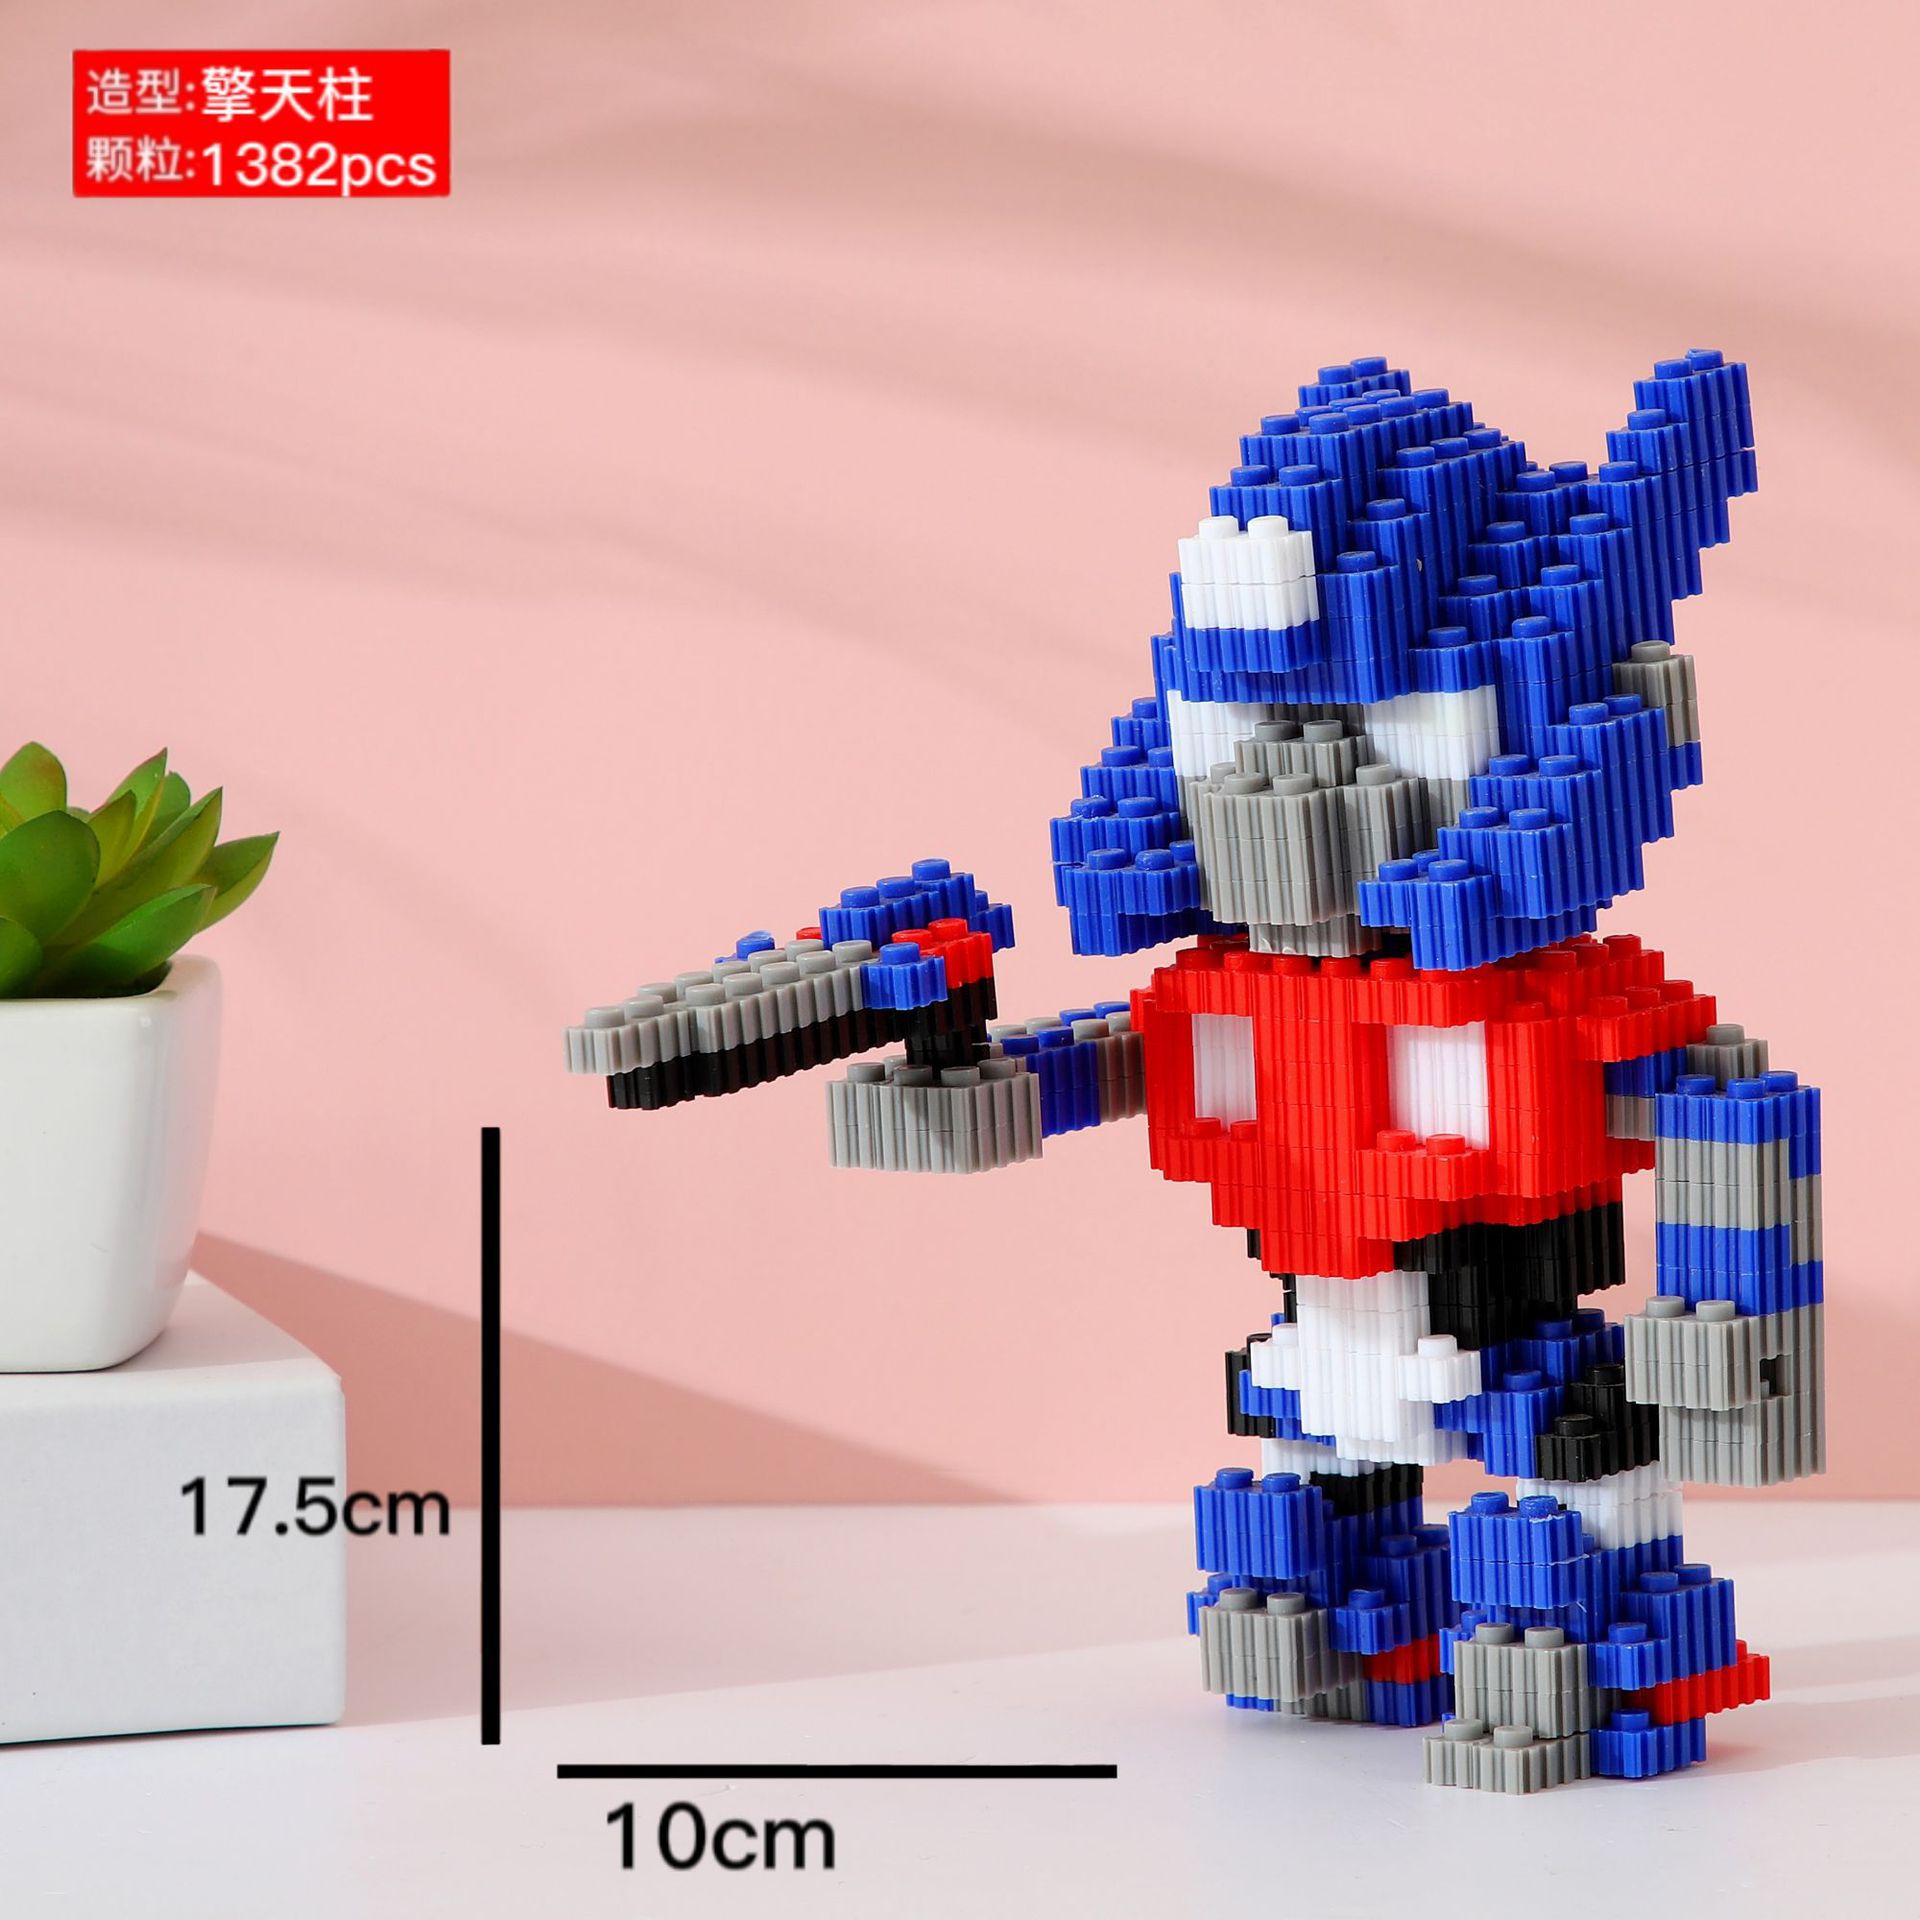 Building Blocks Toys Educational Toys Compatible with Lego Building Blocks Wholesale 8mm Small Particles Building Block in Series Medium Box Stall